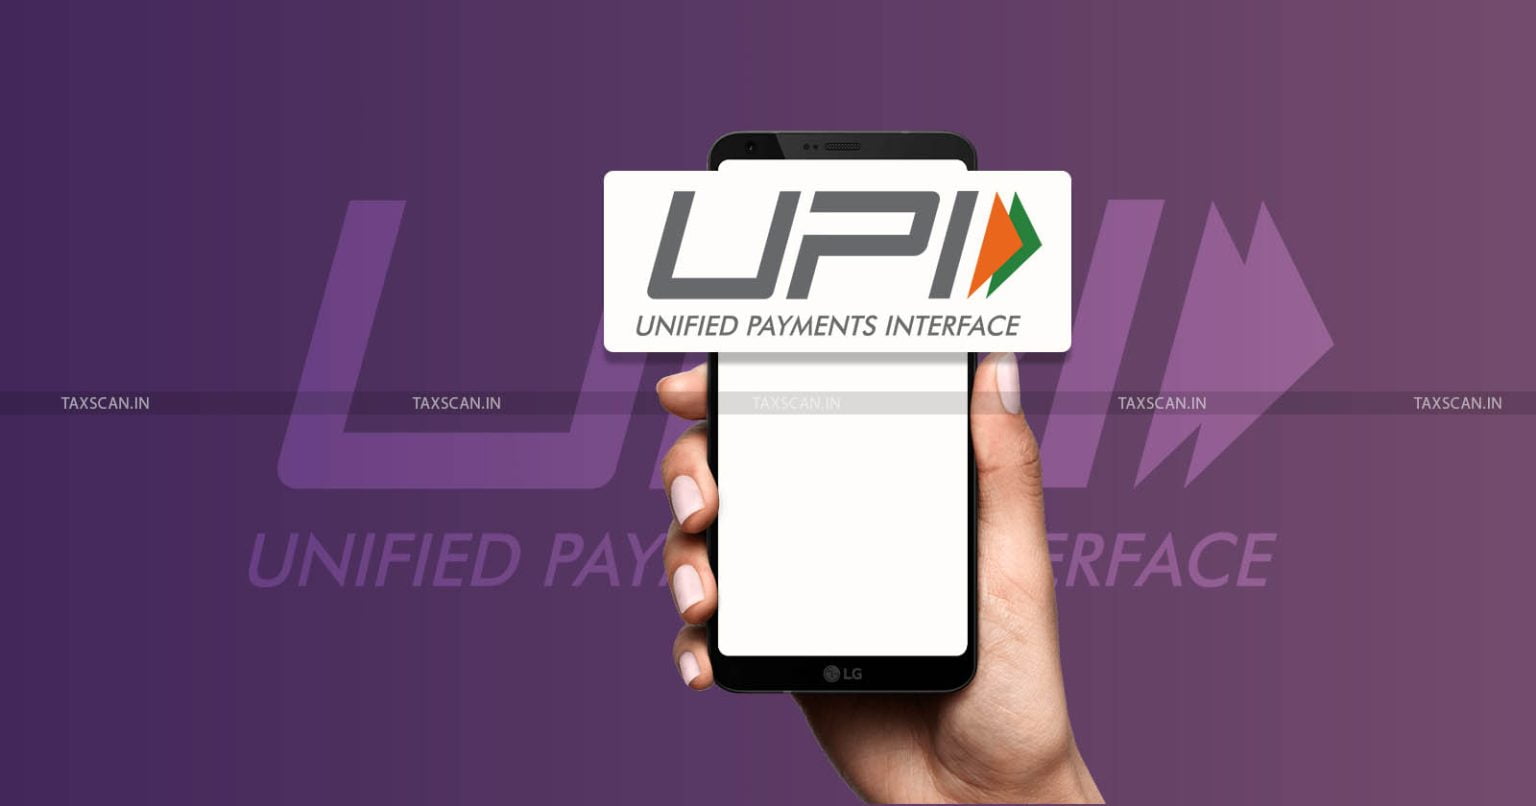 Curbing Fraud - Government - Delay for First UPI Transfers - First UPI Transfers - UPI Transfers - UPI - taxscan